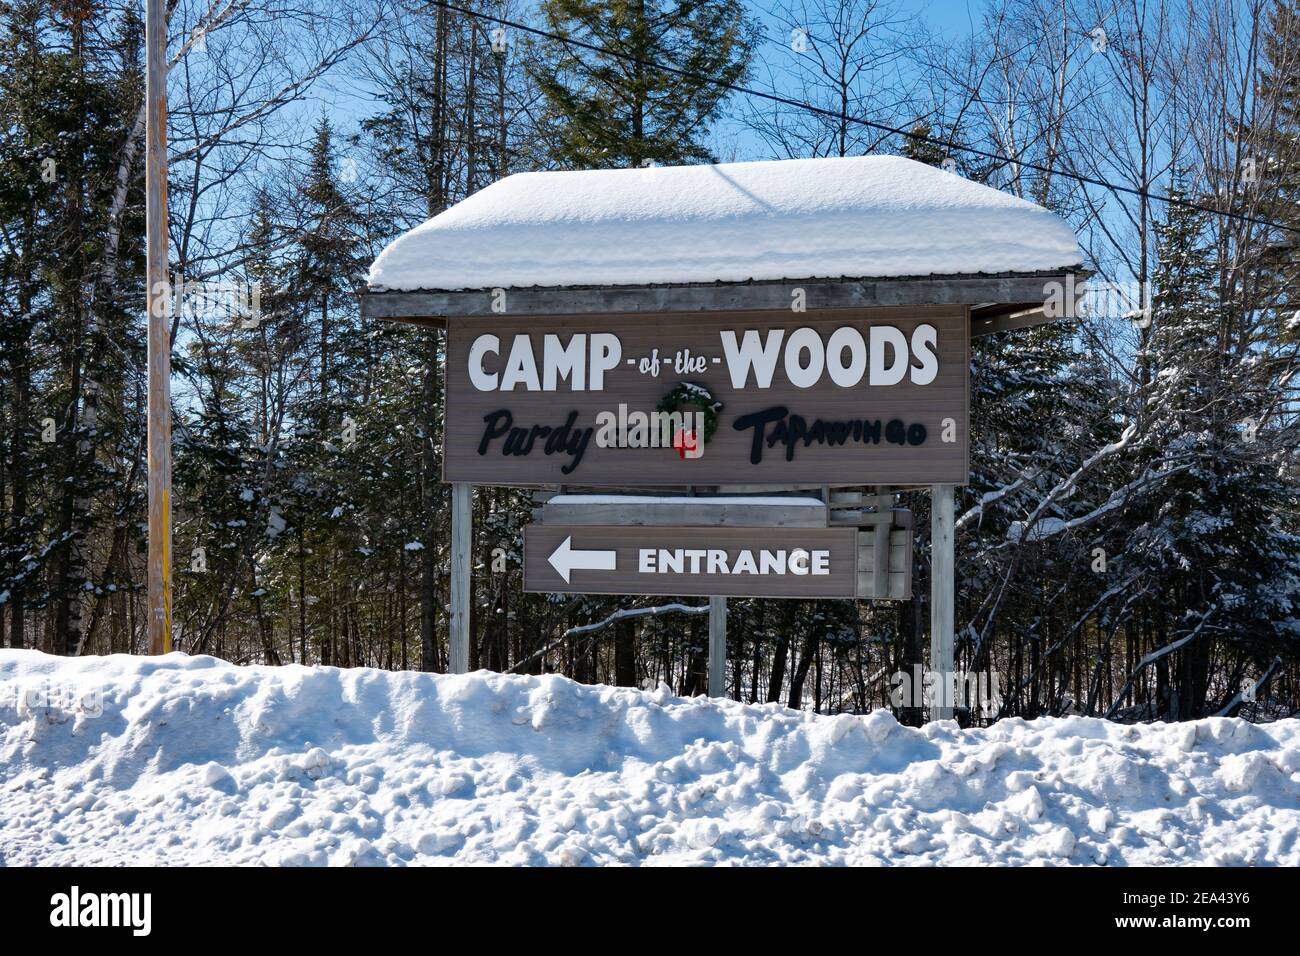 A sign at the entrance to Camp-of-the-Woods, a christian family resort / camp & conference center located in Speculator, NY on Lake Pleasant in winter Stock Photo